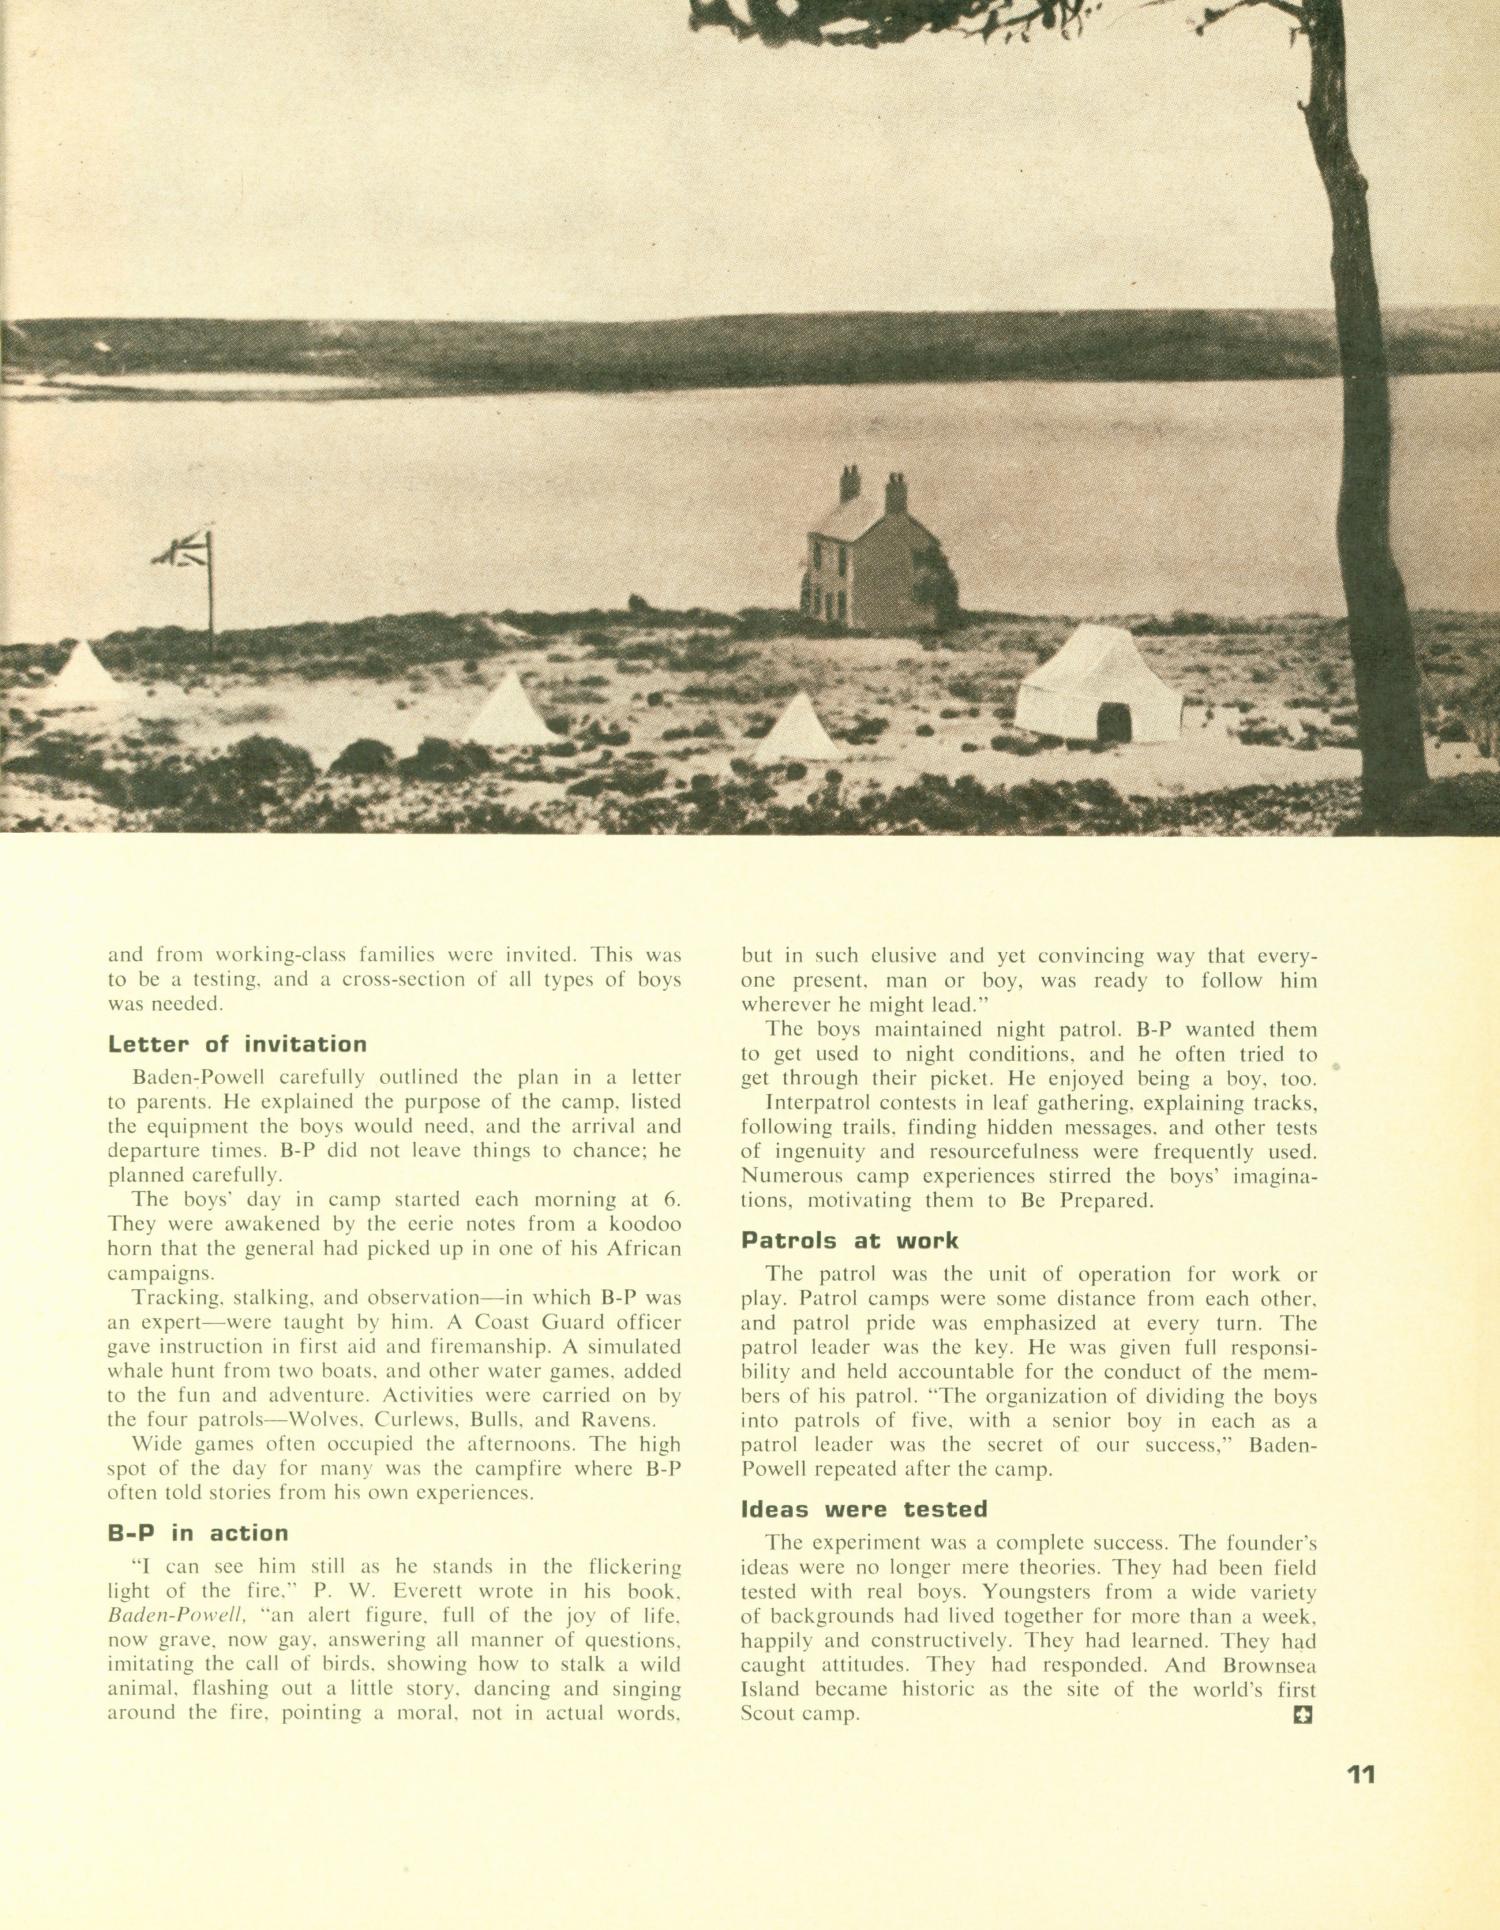 Scouting, Volume 55, Number 2, February 1967
                                                
                                                    11
                                                